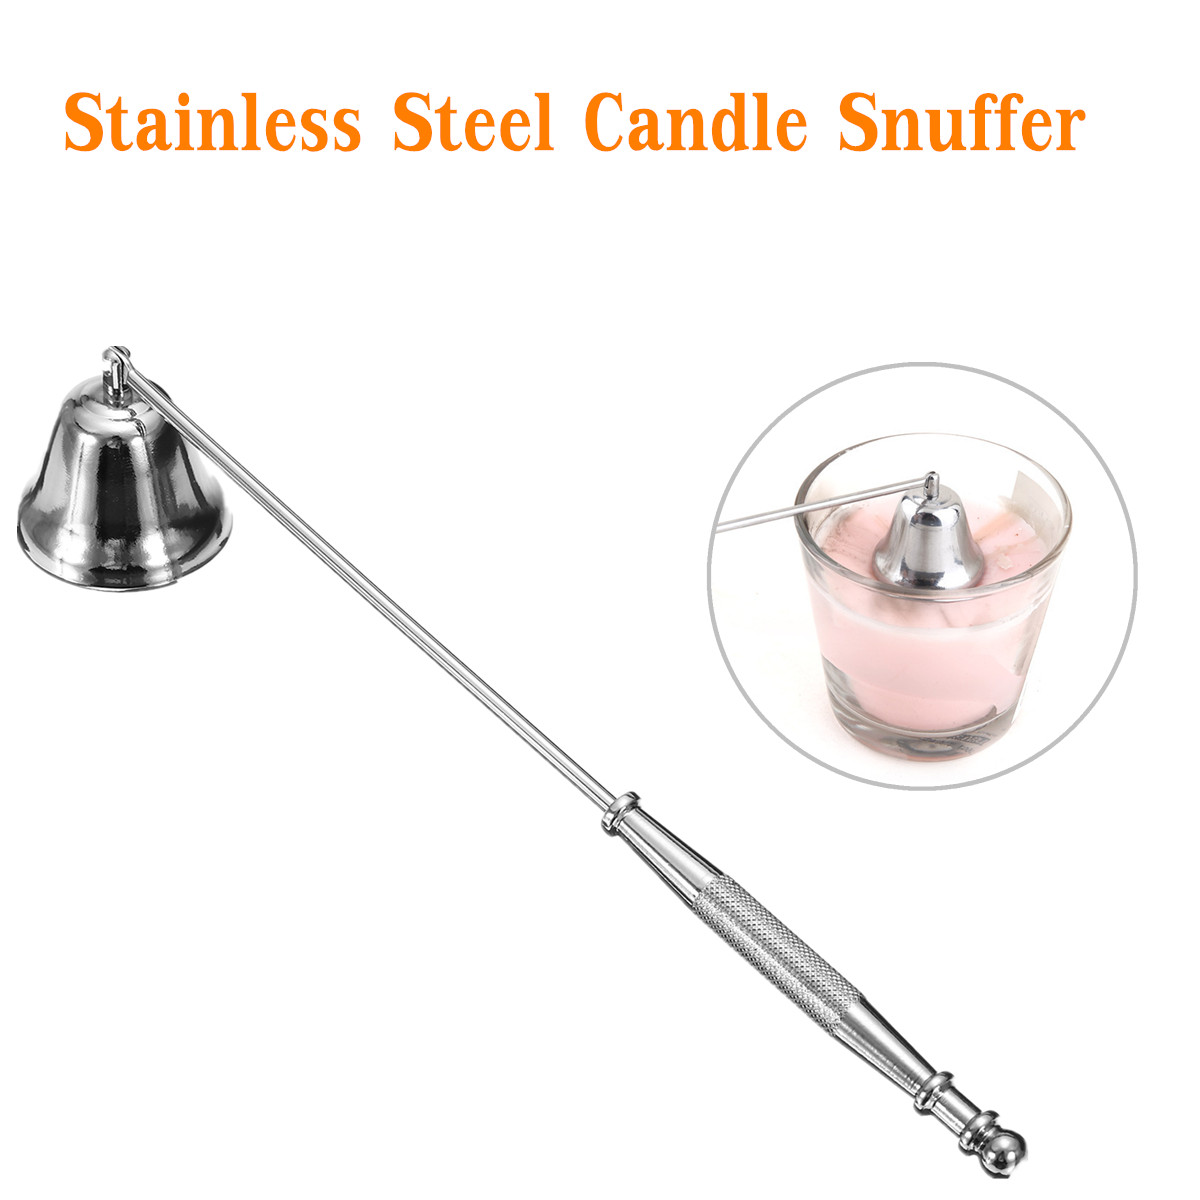 Stainless-Steel-Candle-Snuffer-Silver-Long-Extinguisher-for-Tea-Light-Candle-Tool-1252840-1